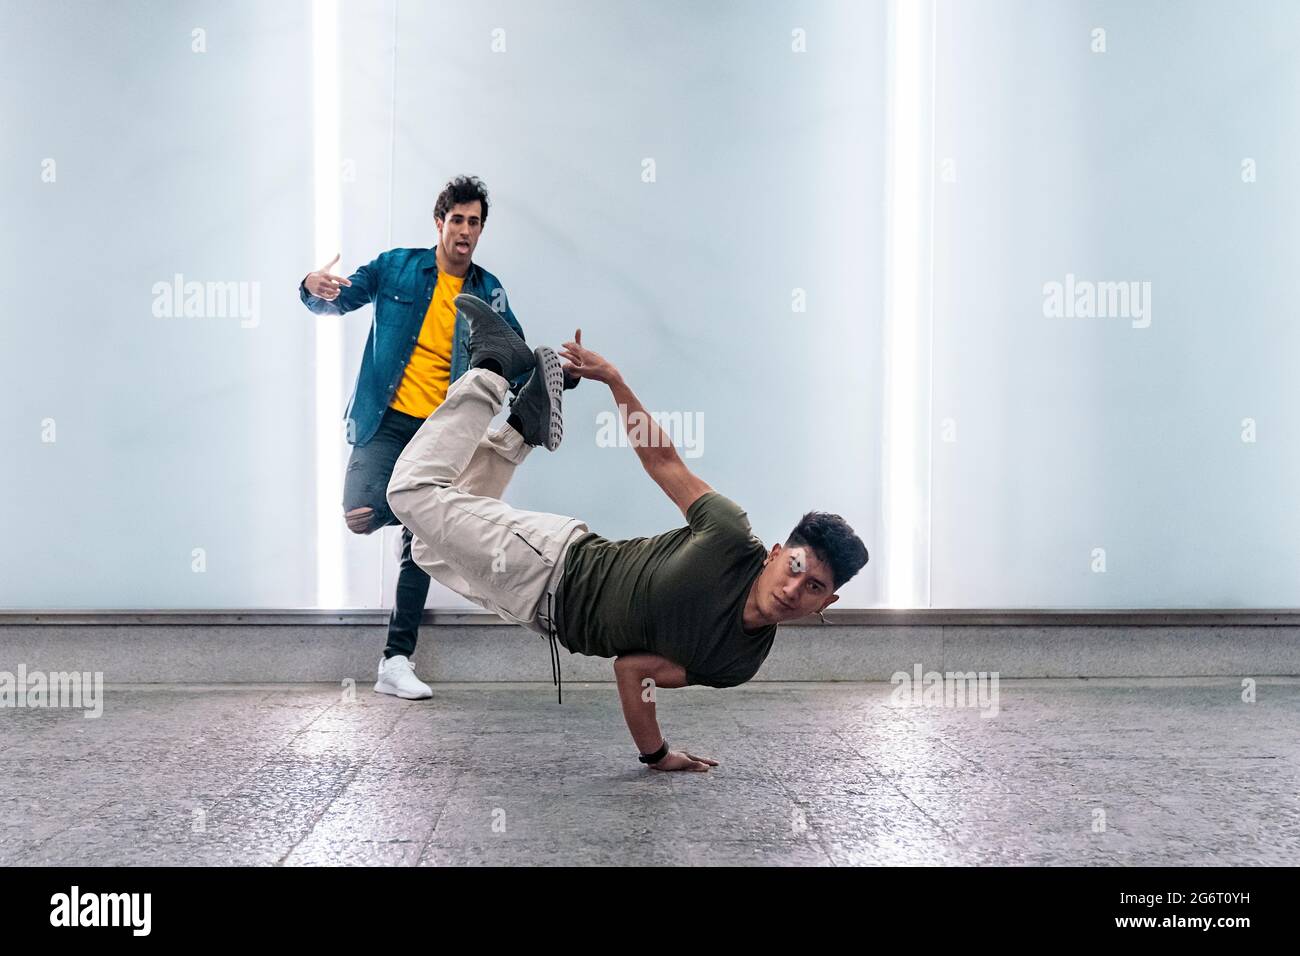 Amazing young men practicing break dance together against white wall with lights. Stock Photo